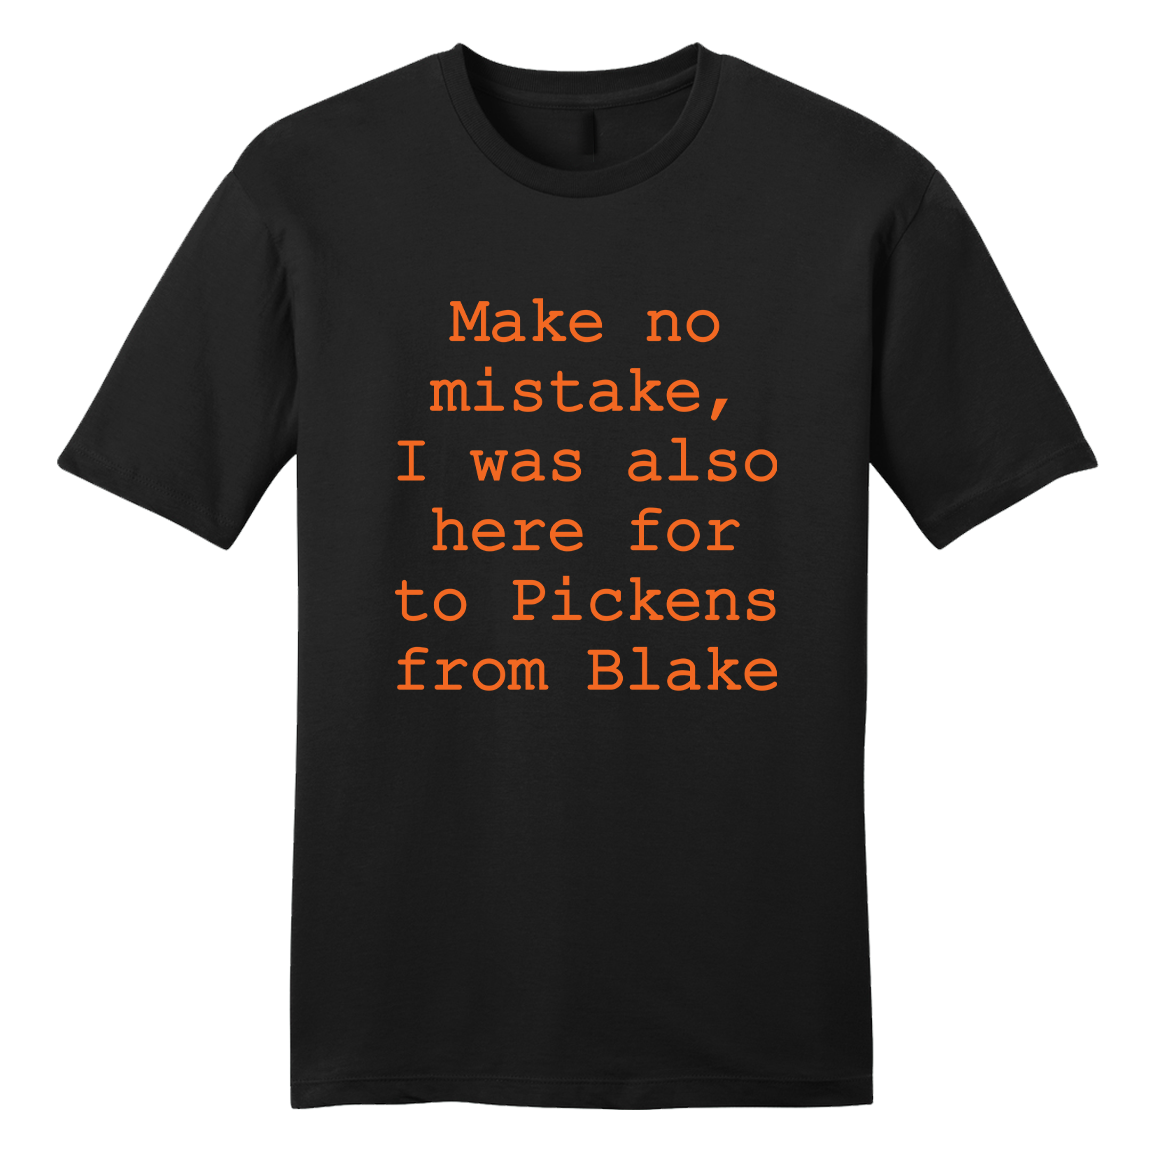 Here for Pickens From Blake - Cincy Shirts